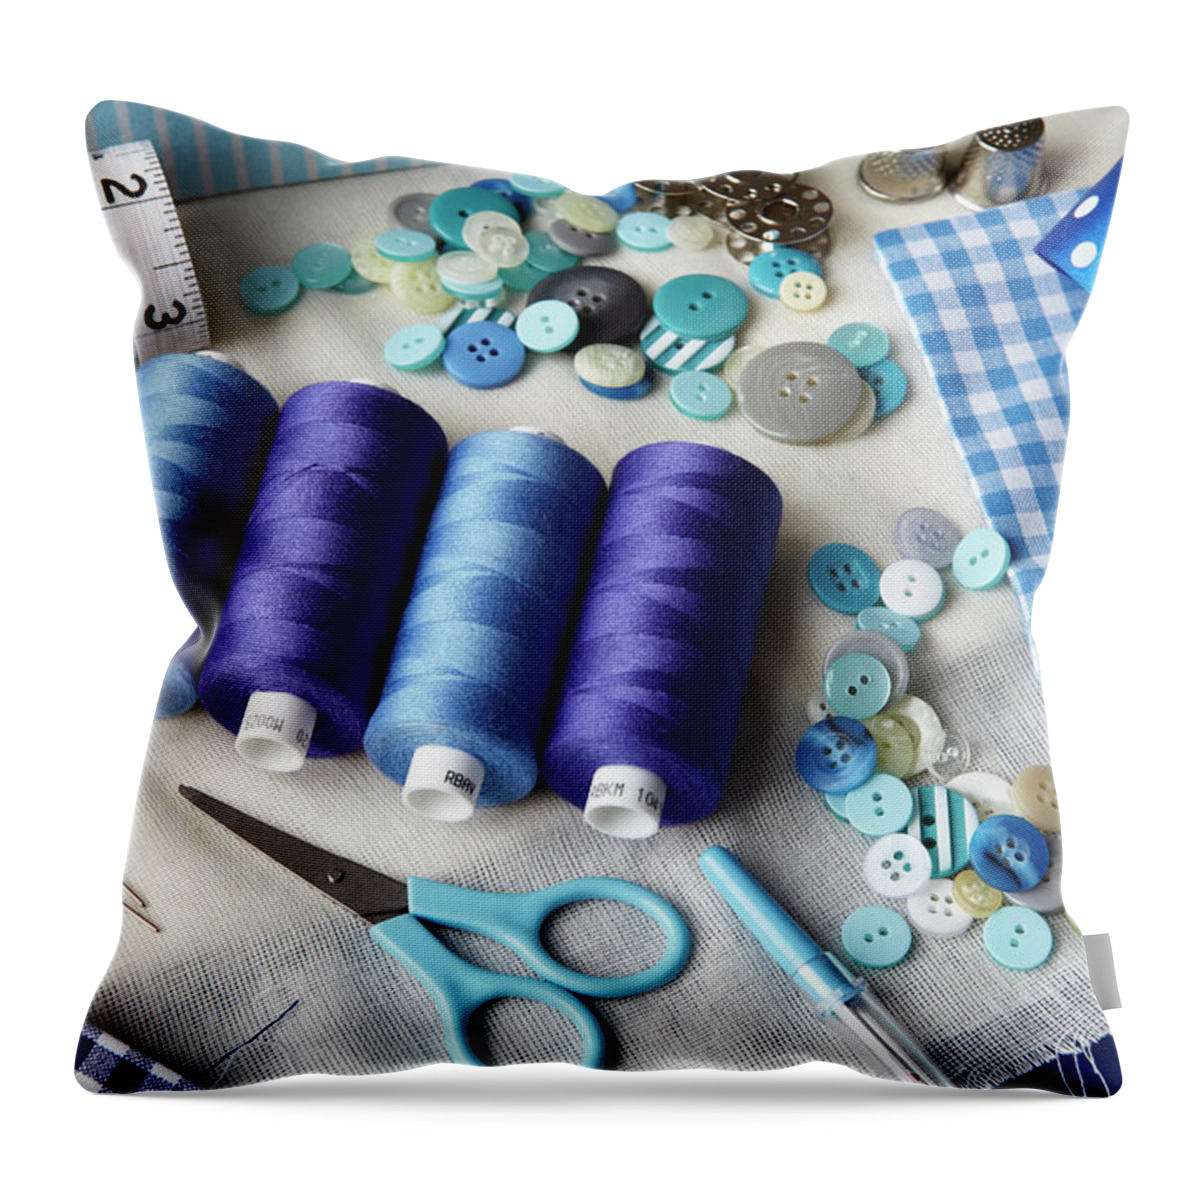 Working Throw Pillow featuring the photograph Thread, Buttons, Measuring Tape On Desk #1 by Debby Lewis-harrison